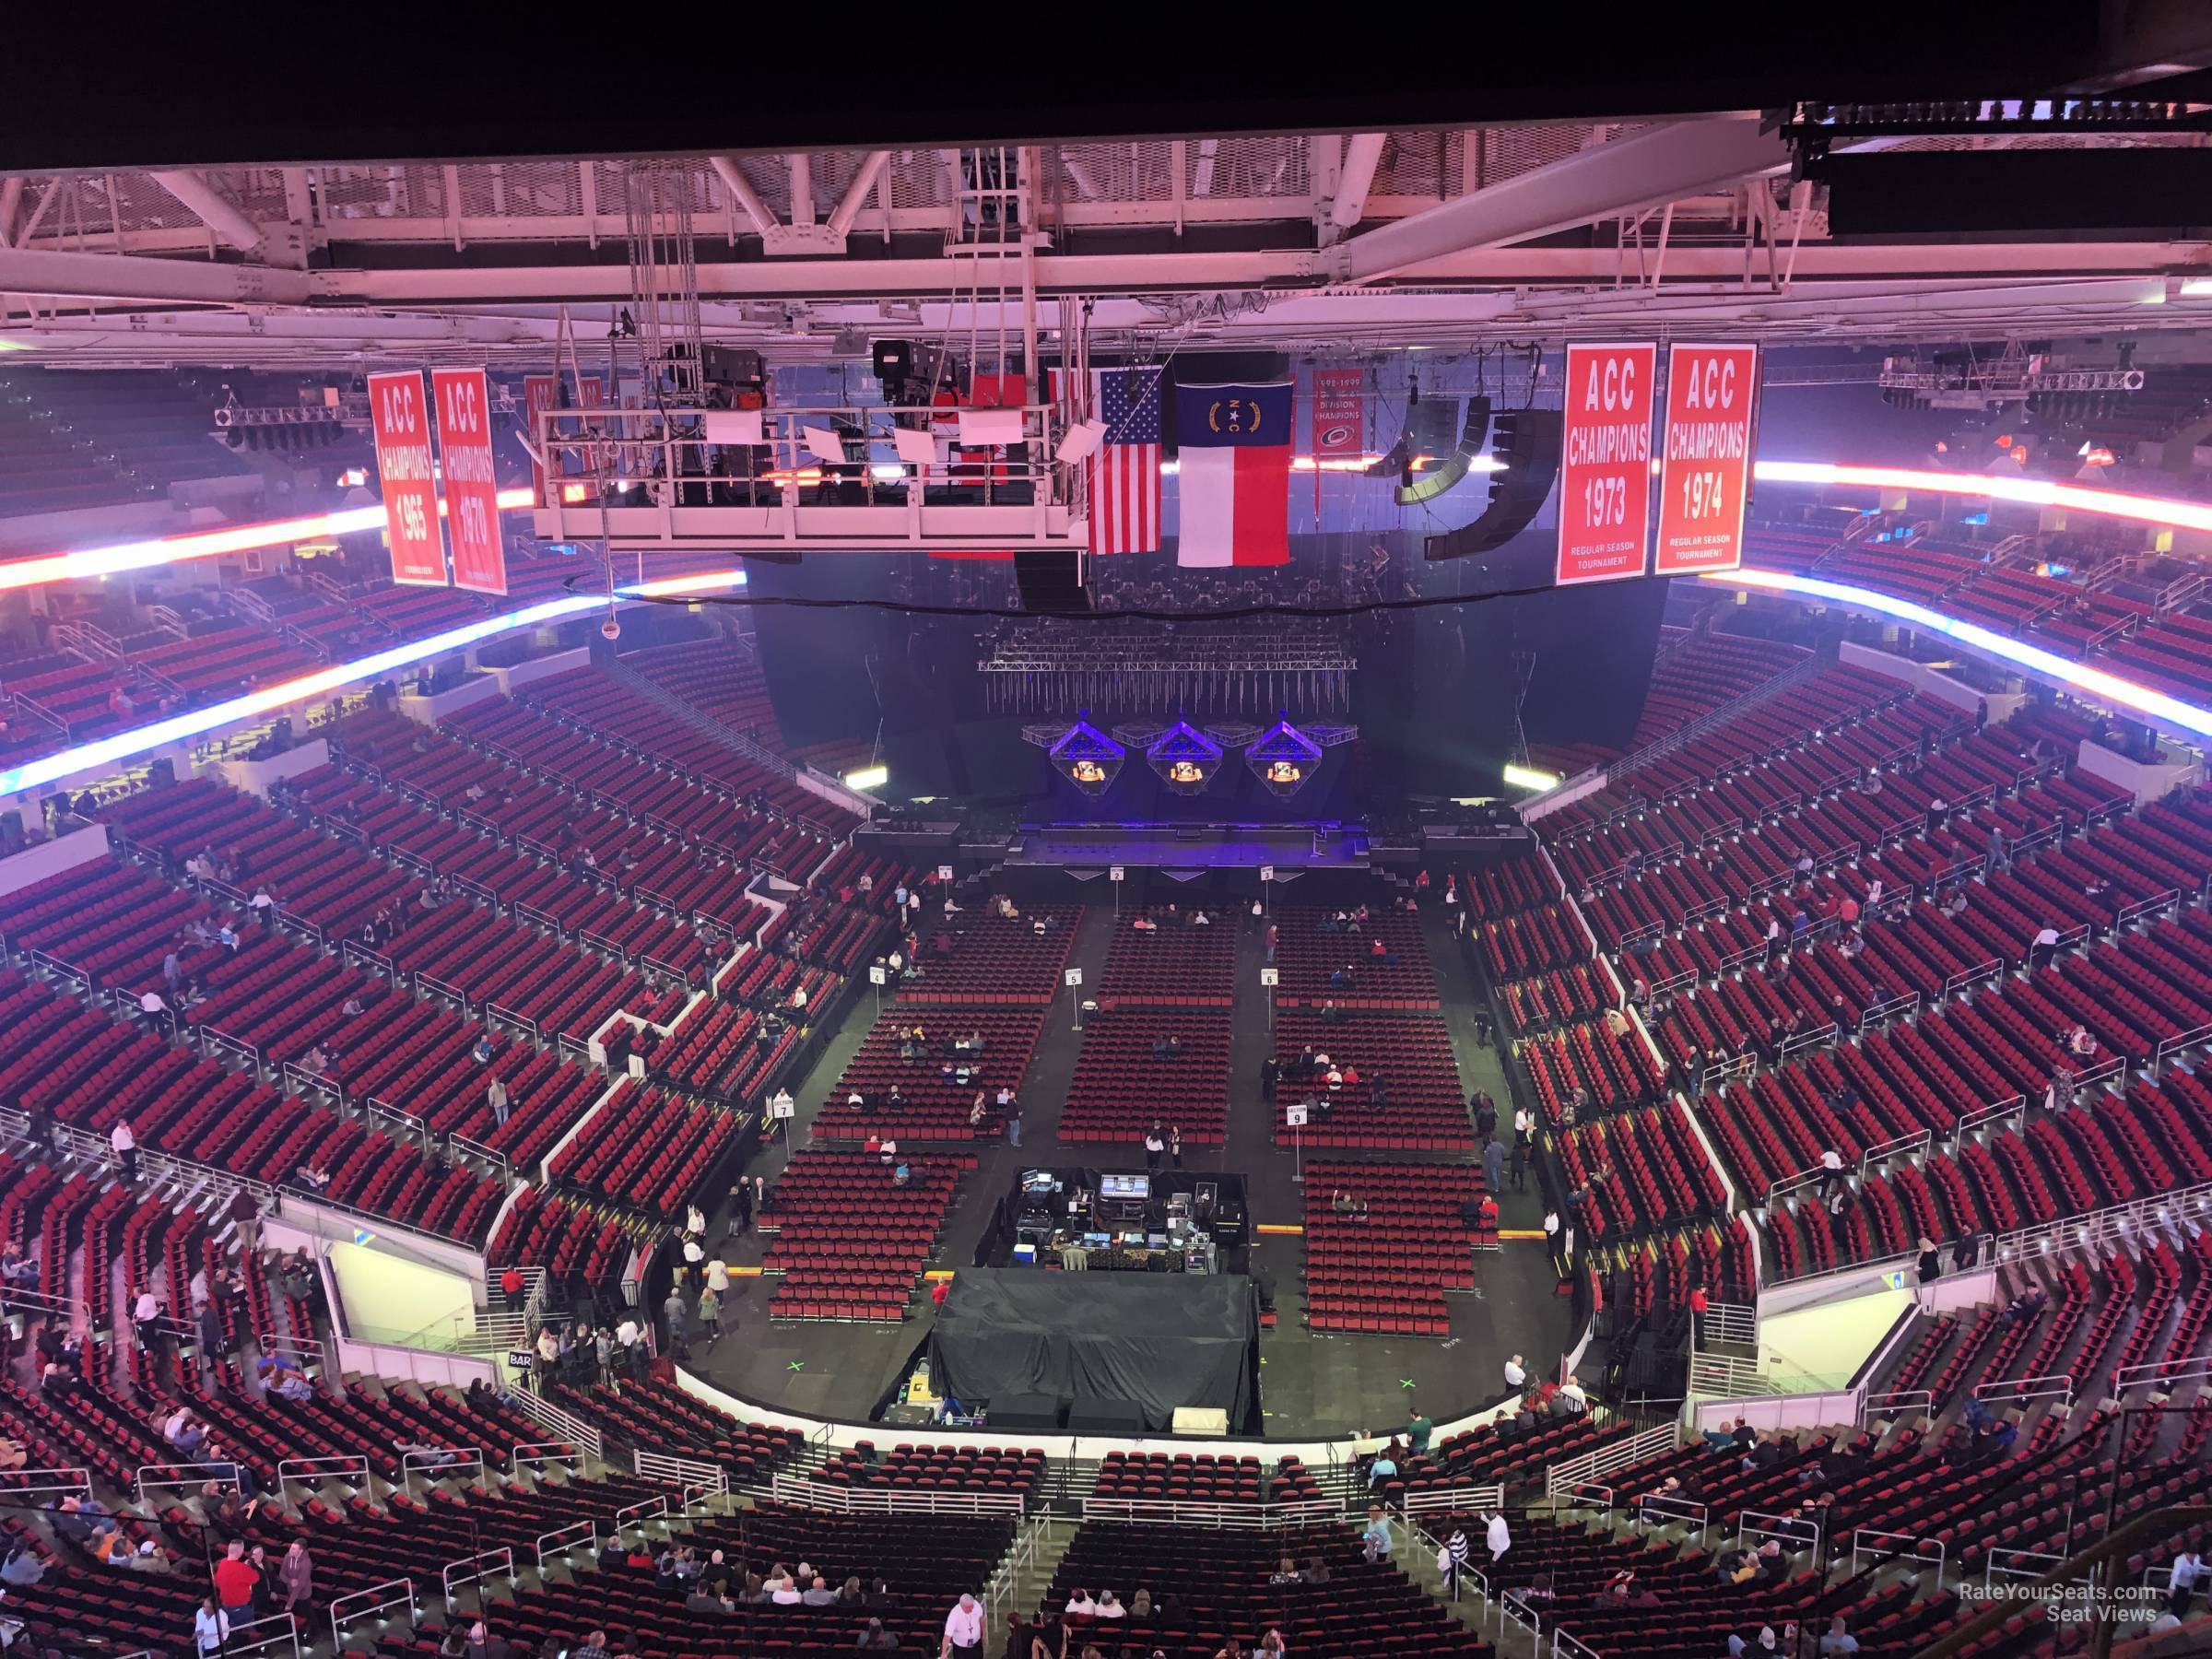 PNC Arena Section 333 Concert Seating - RateYourSeats.com